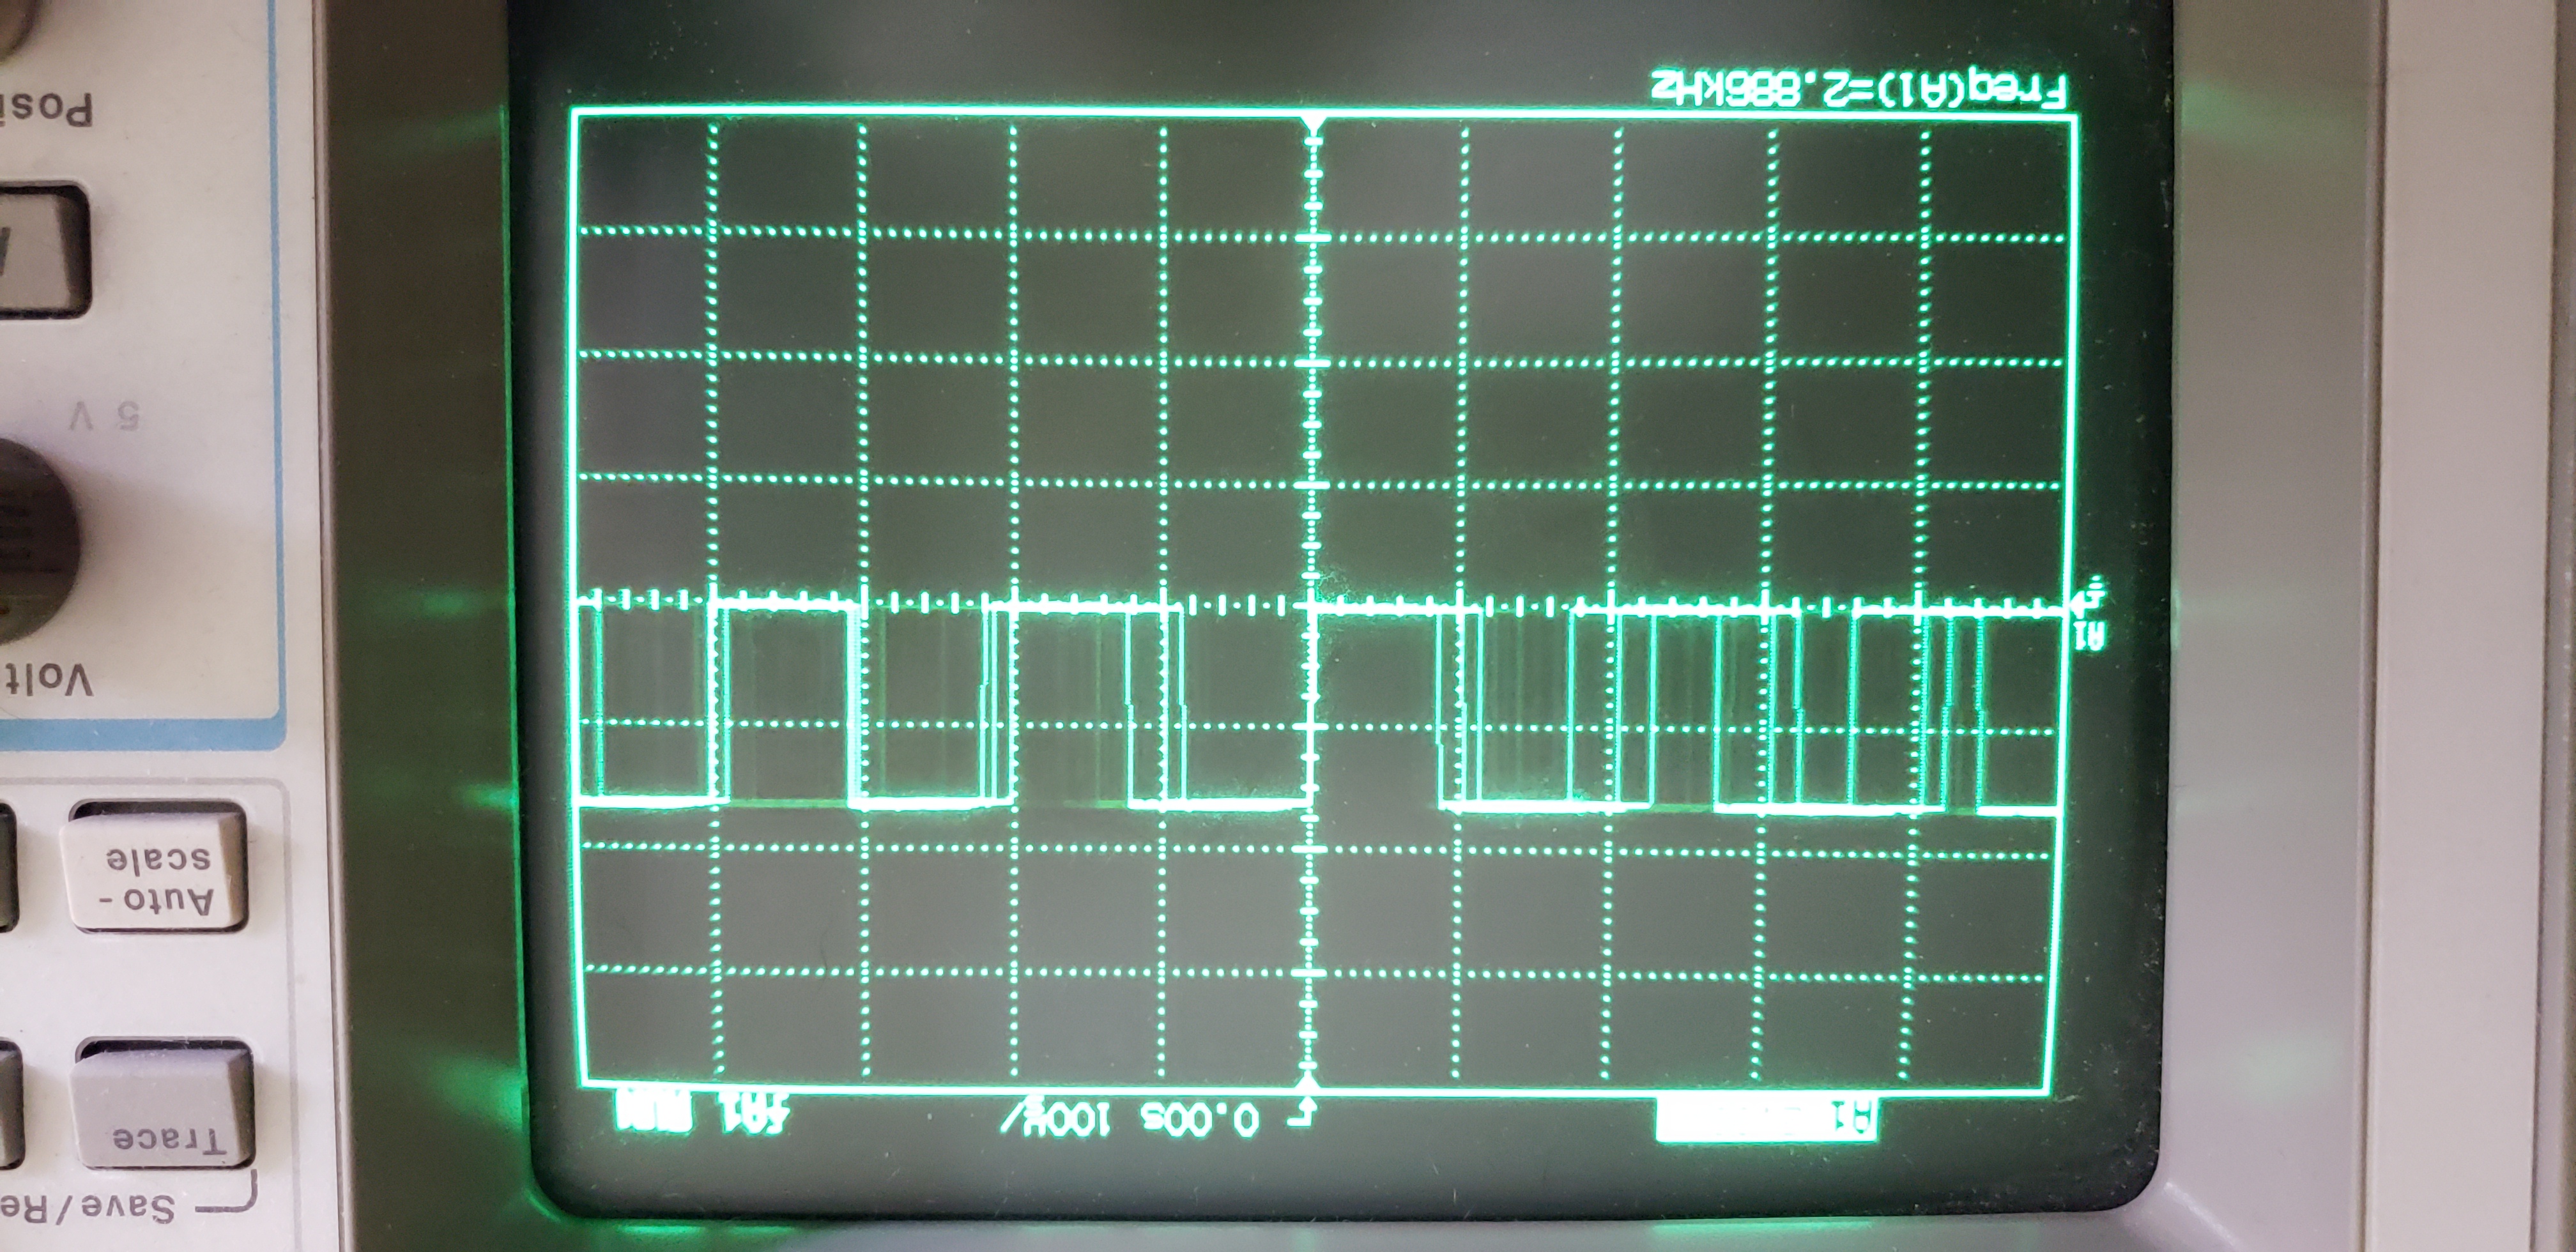 Digital Output toggle benchmark test result viewed on oscilloscope